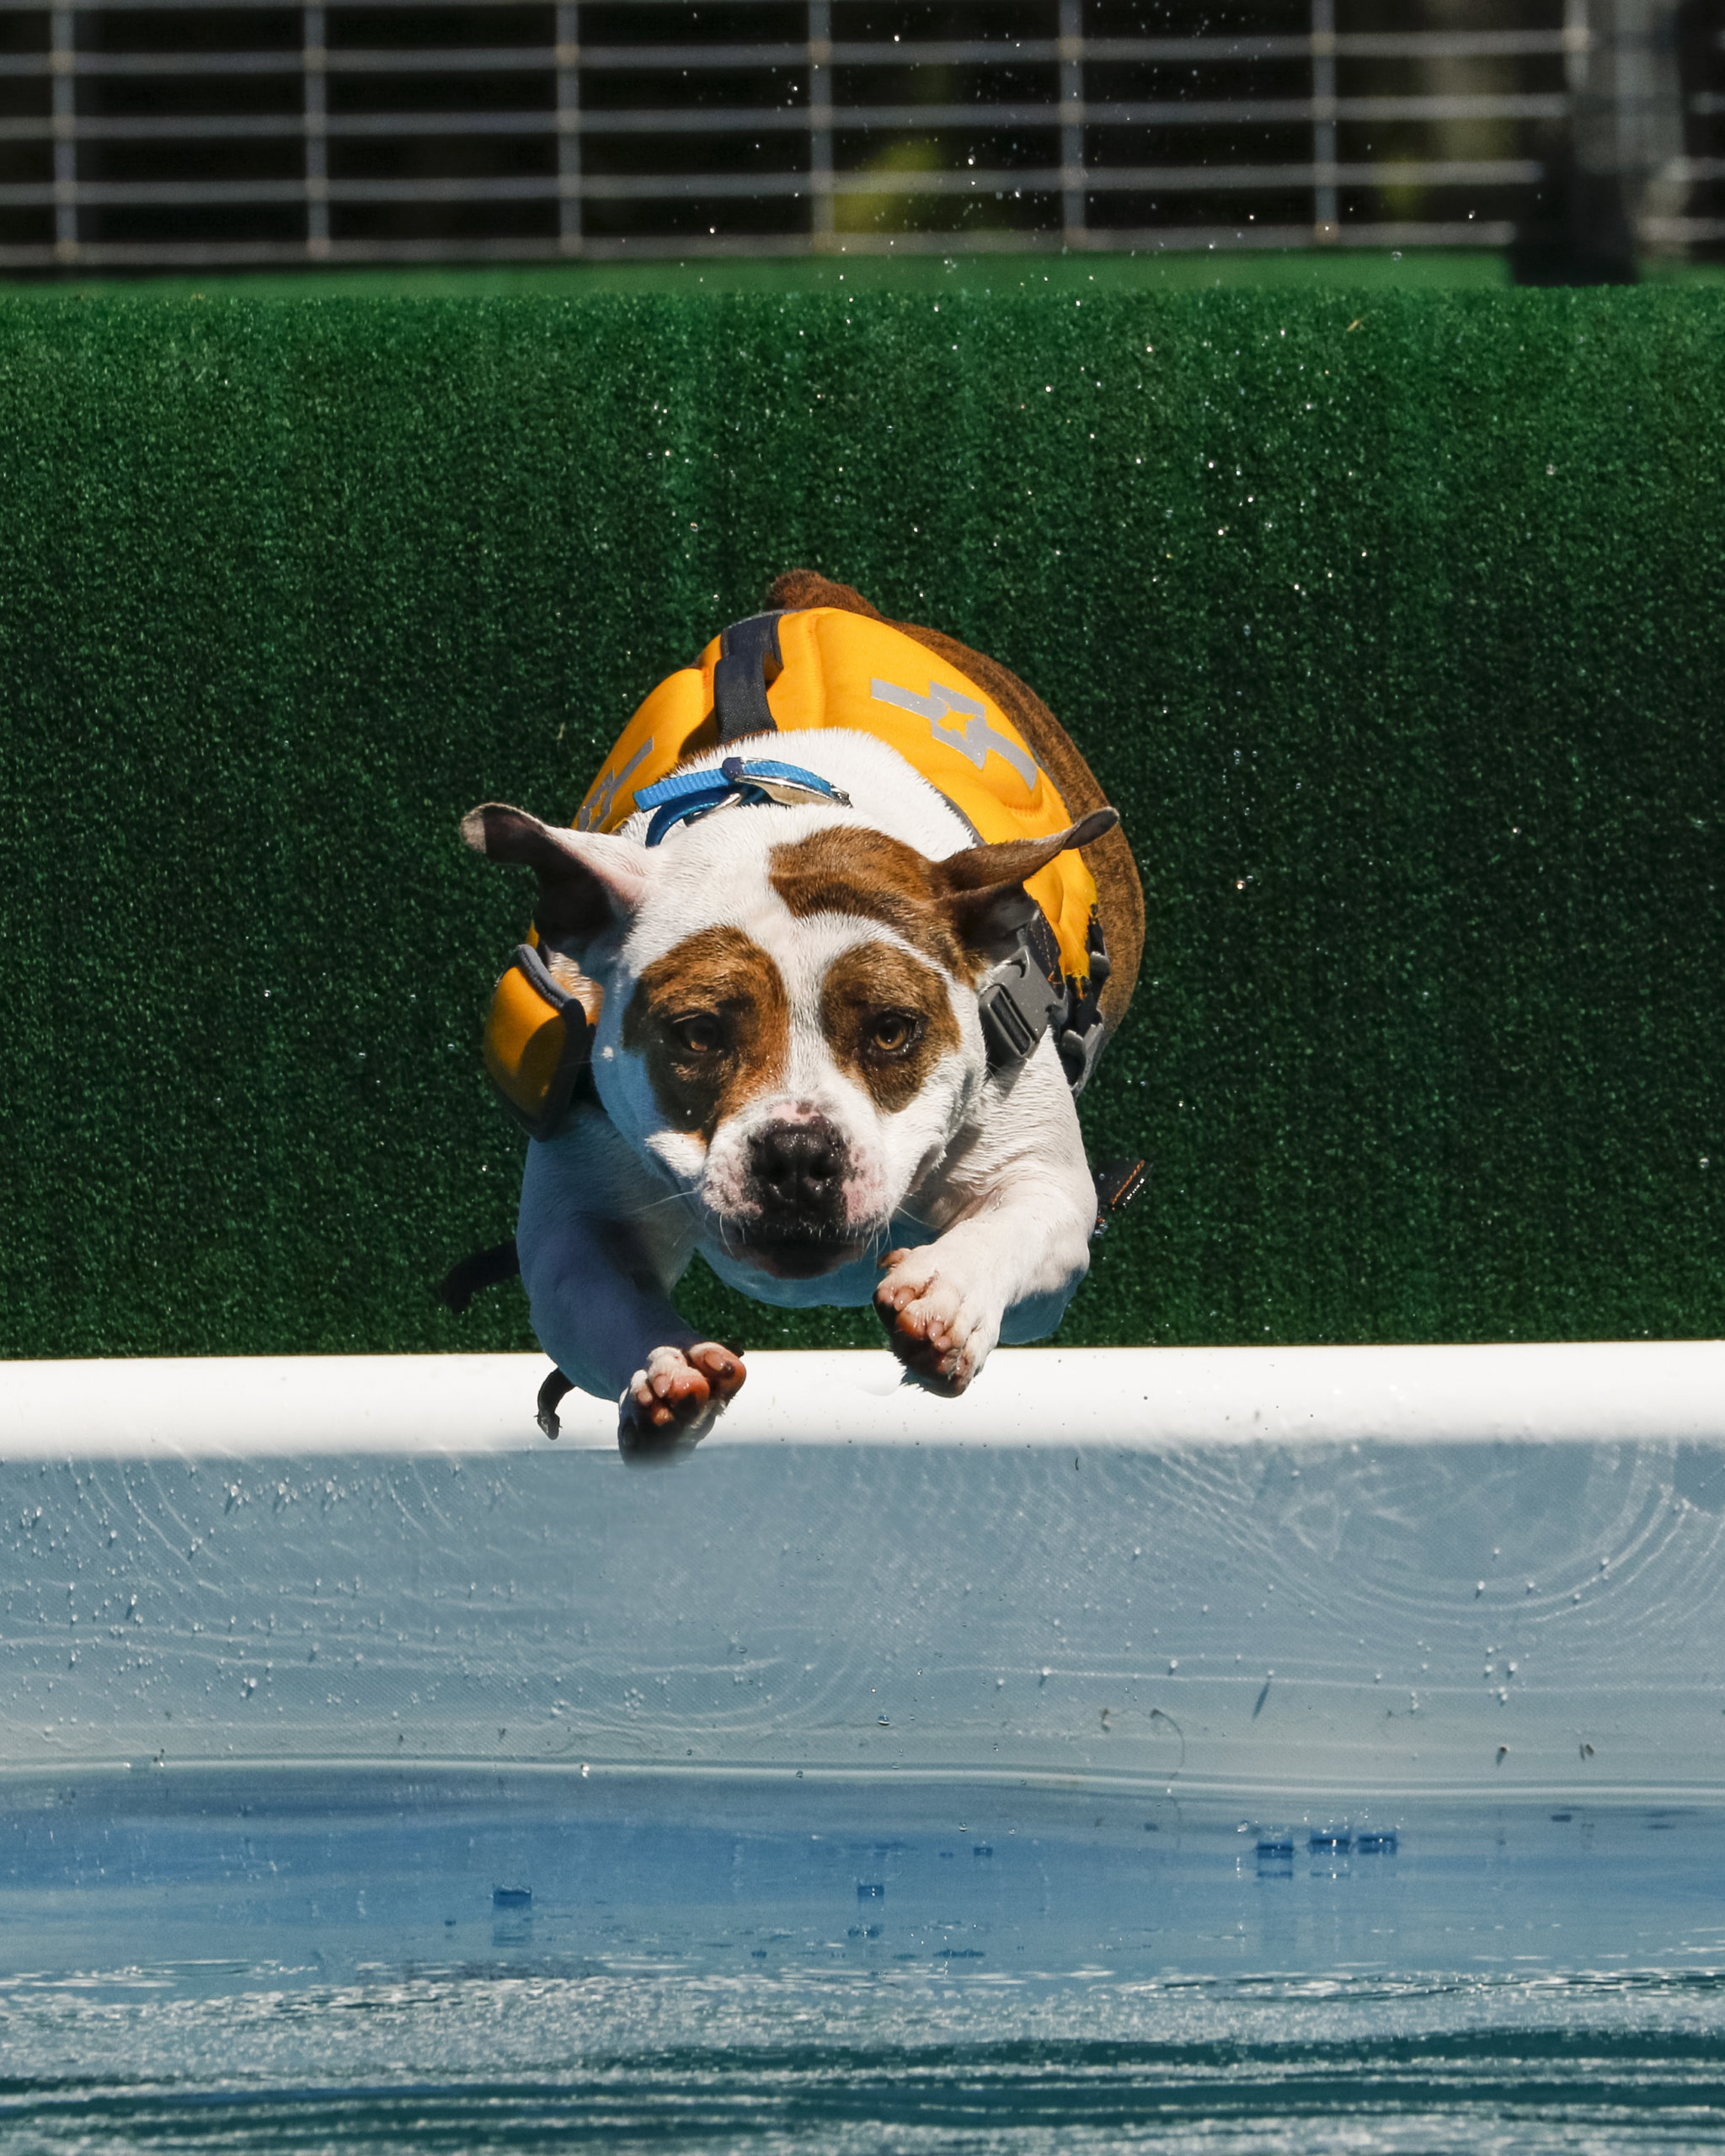 See dogs dive at the annual Greenport event on the North Fork this week